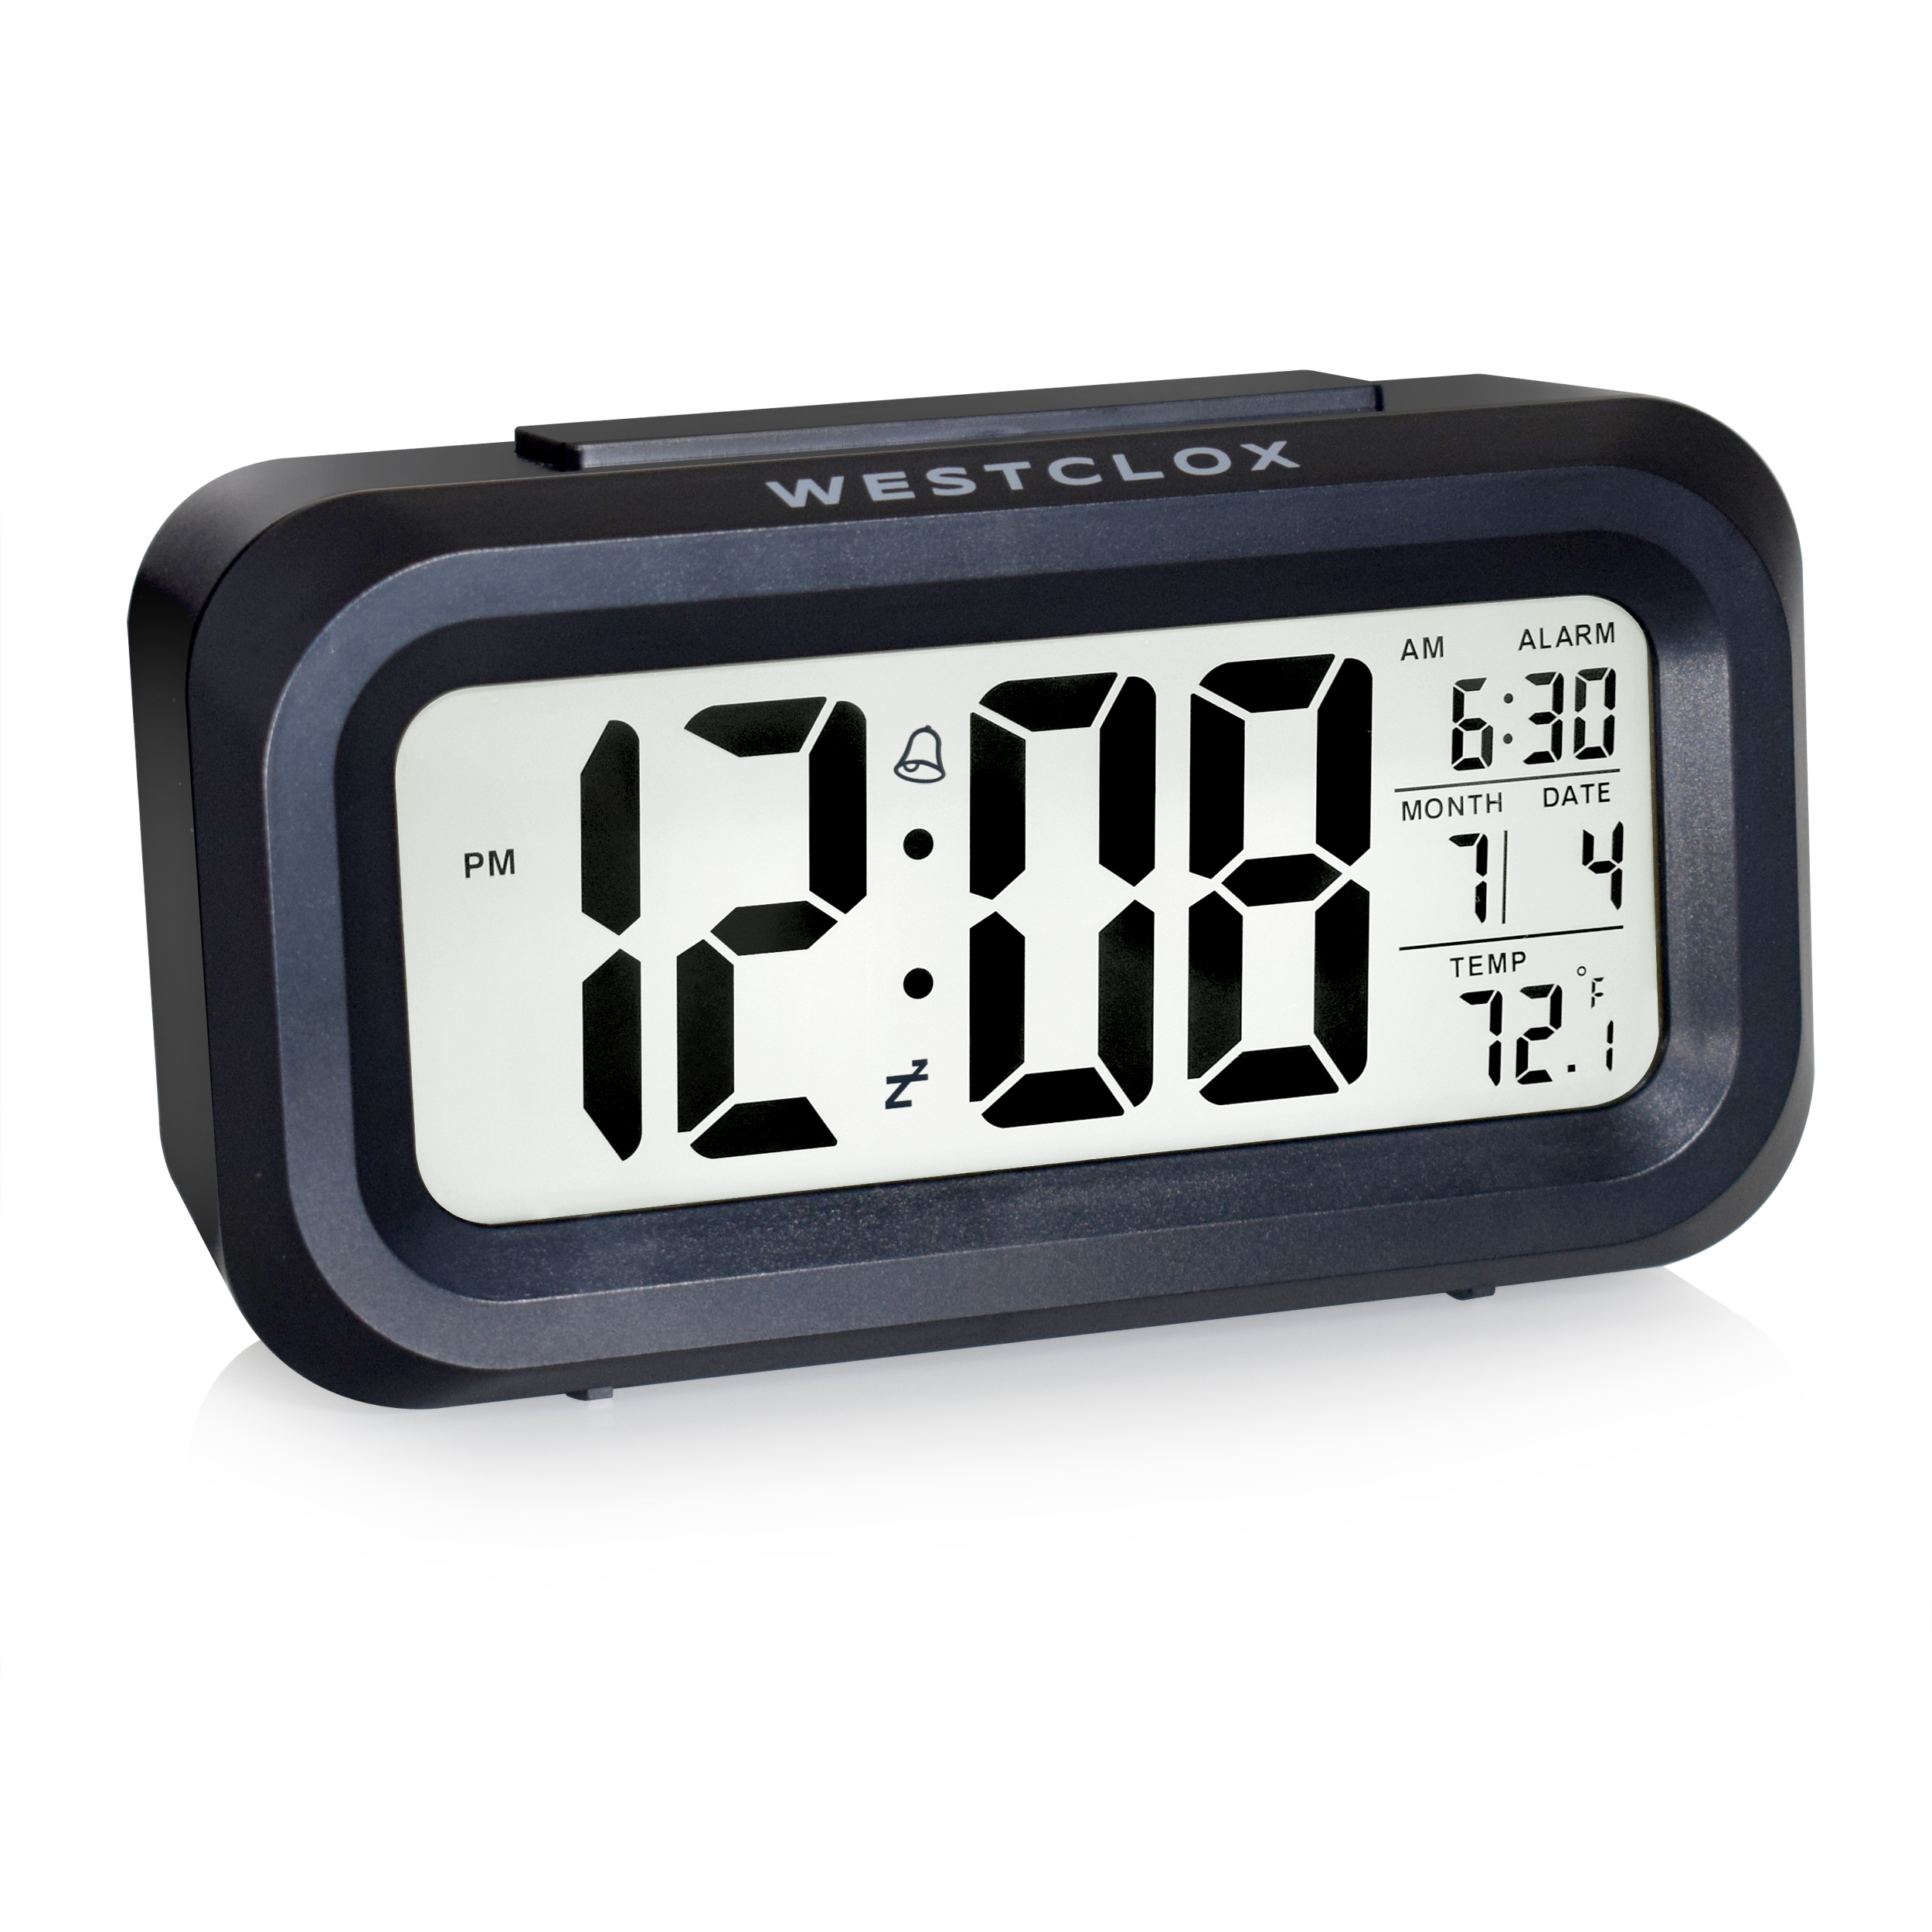 Mainstays Black Digital Alarm Clock with LED Backlight and Easy-to-Read LCD Display - image 2 of 5